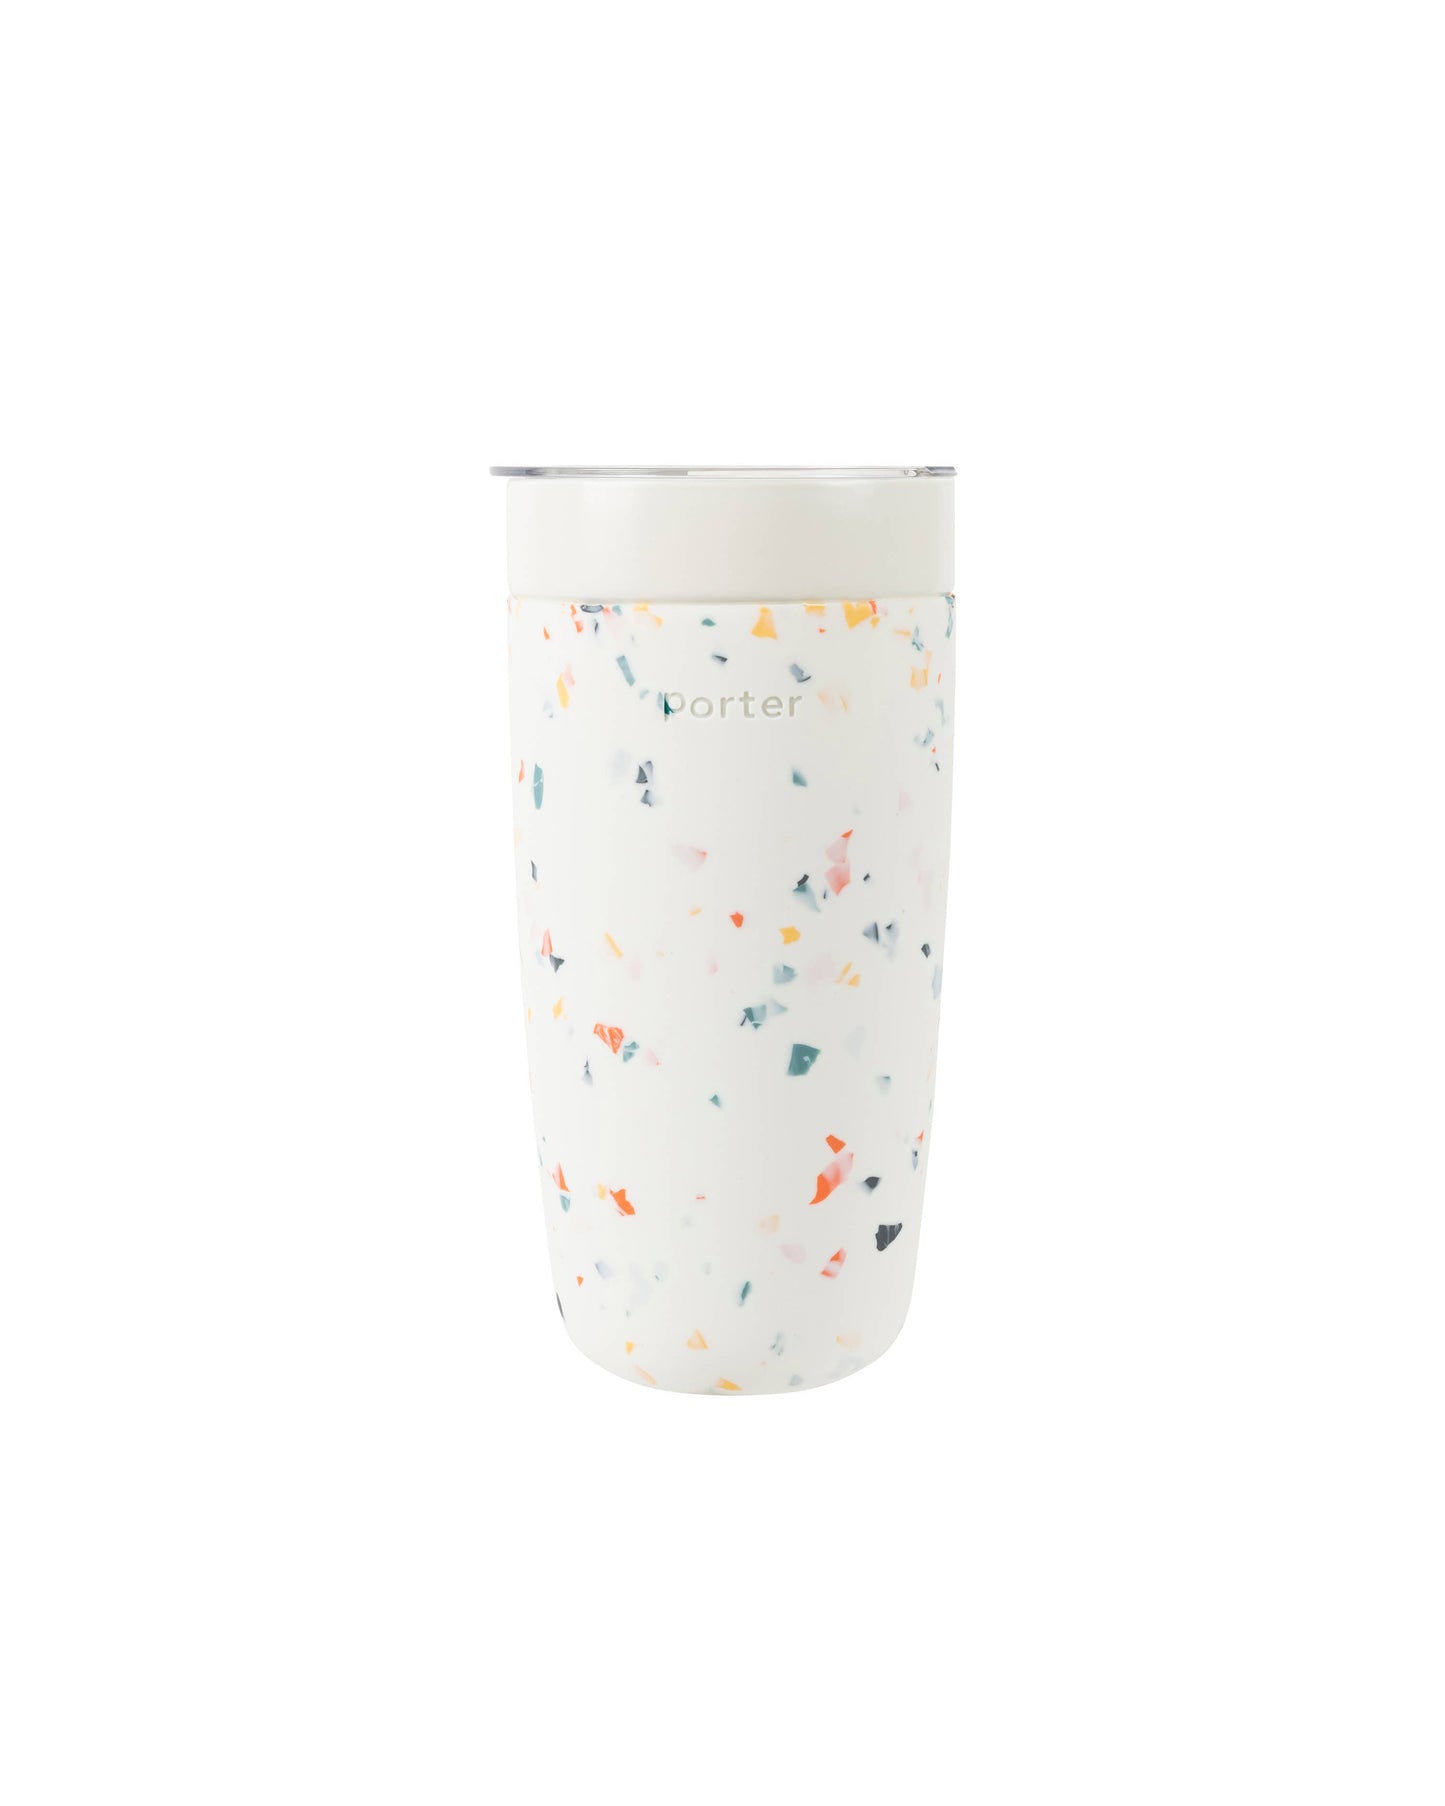 Porter - Insulated Ceramic Stainless Steel Coffee Tumbler - Terrazzo  W&P   -better made easy-eco-friendly-sustainable-gifting